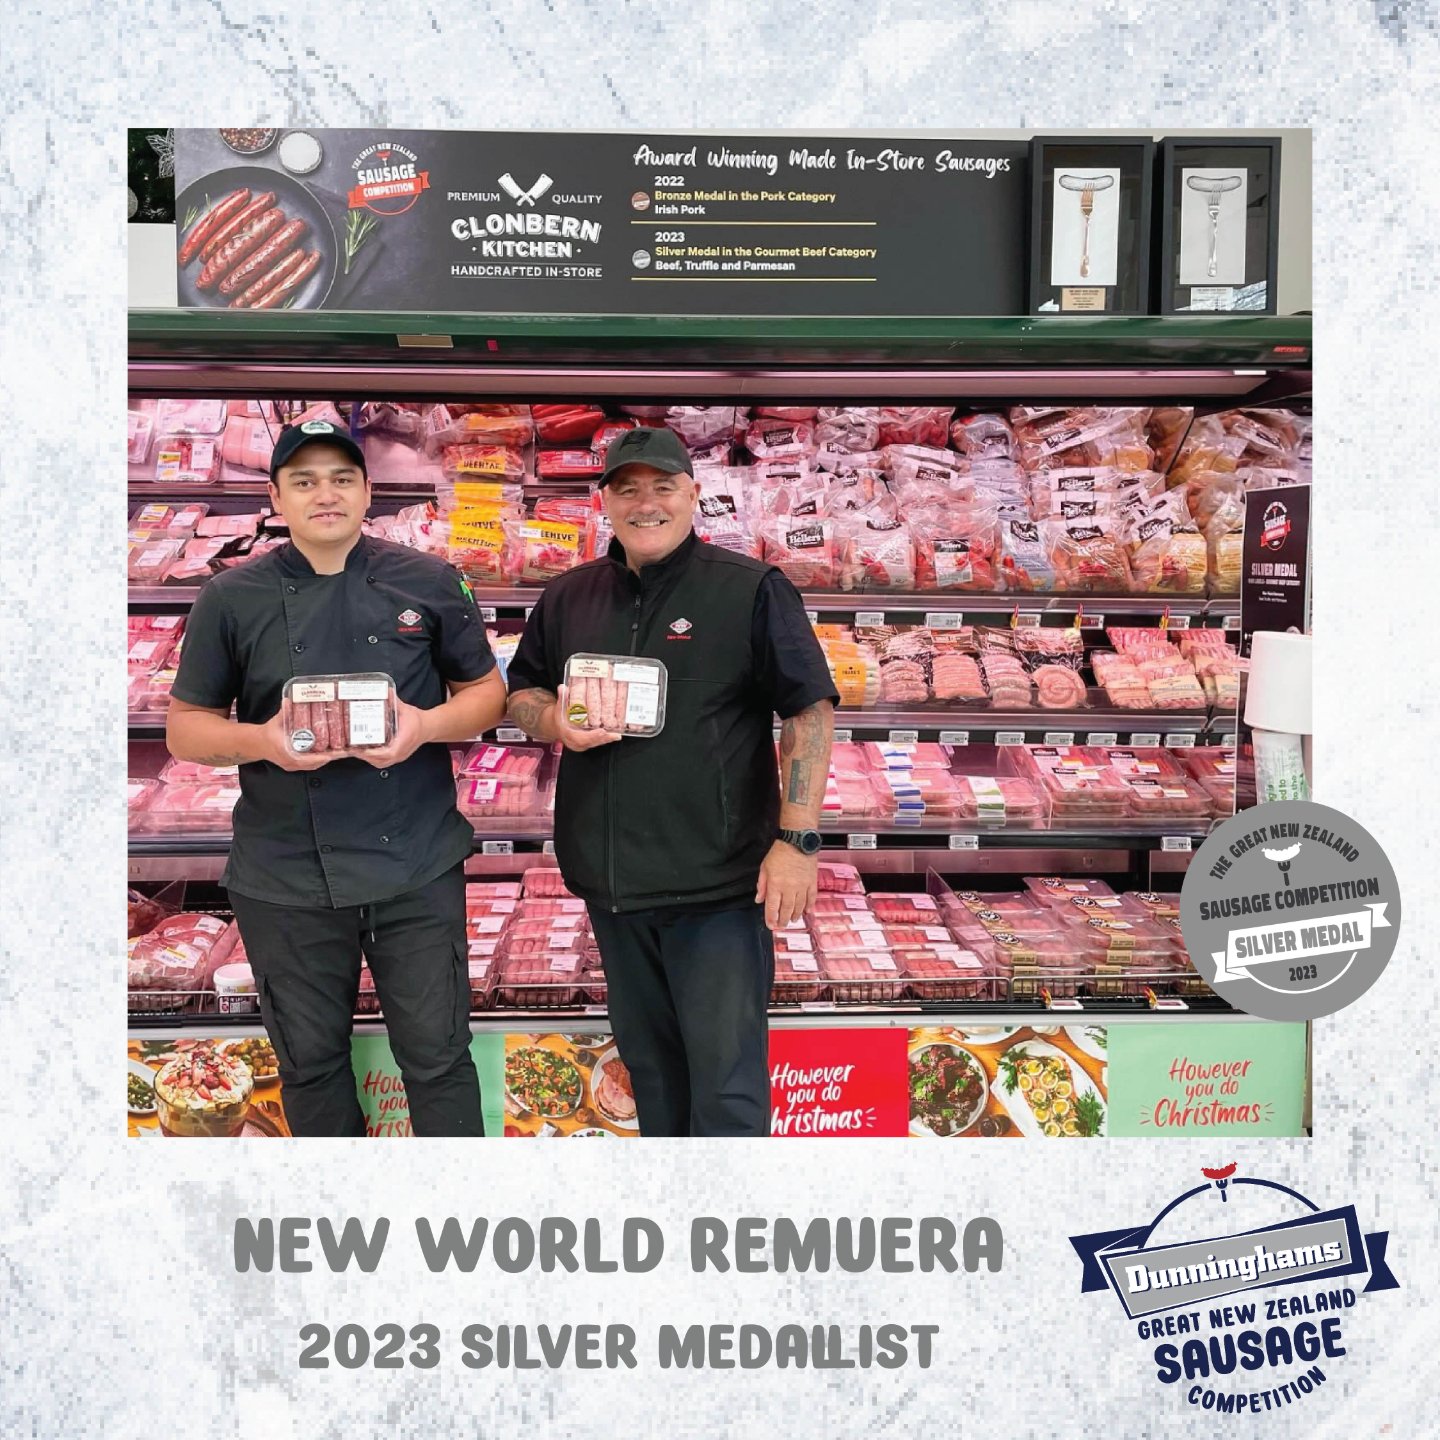 It&rsquo;s not the first time the team at New World Remuera have picked up a medal at the Great NZ Sausage Competition.

They won a Silver medal at last year's awards for their Beef, Truffle and Parmesan sausage. Their customers certainly seem to be 